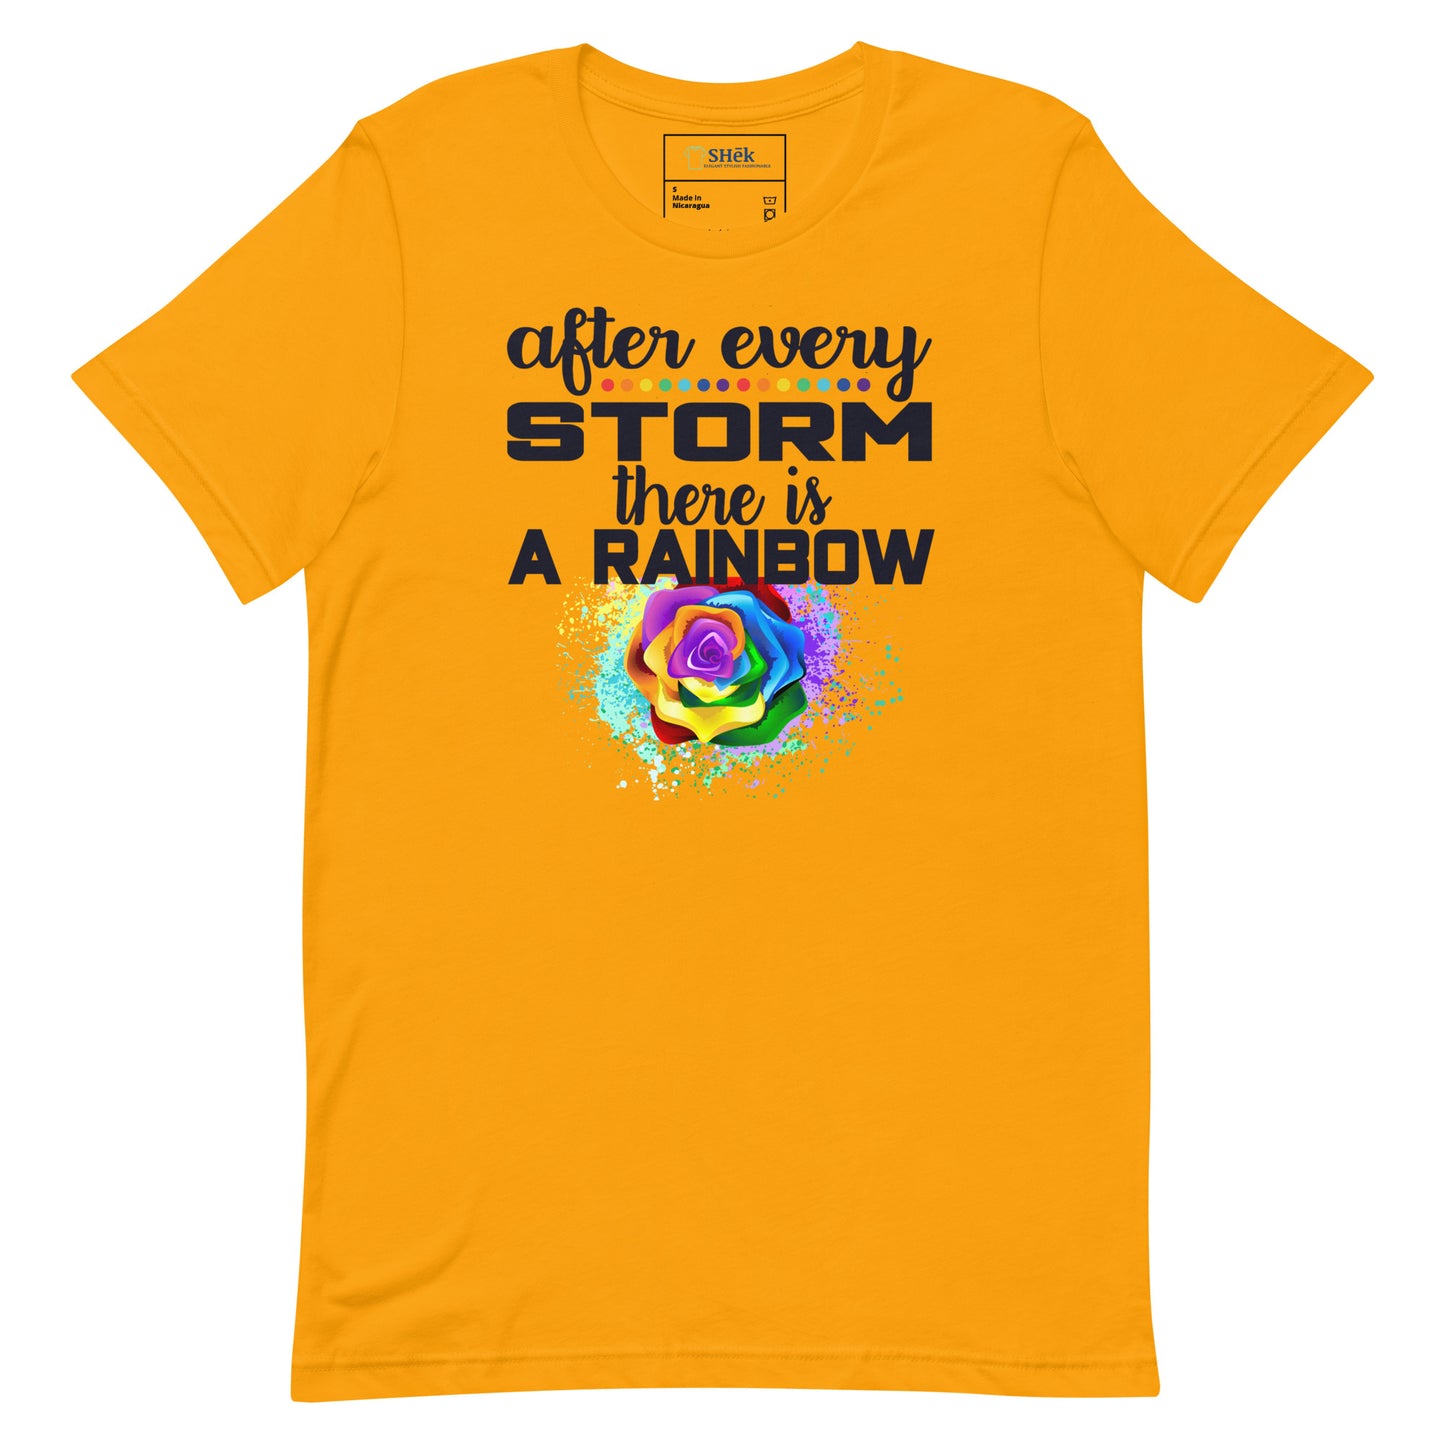 "After Every Storm is a Rainbow" T-shirt